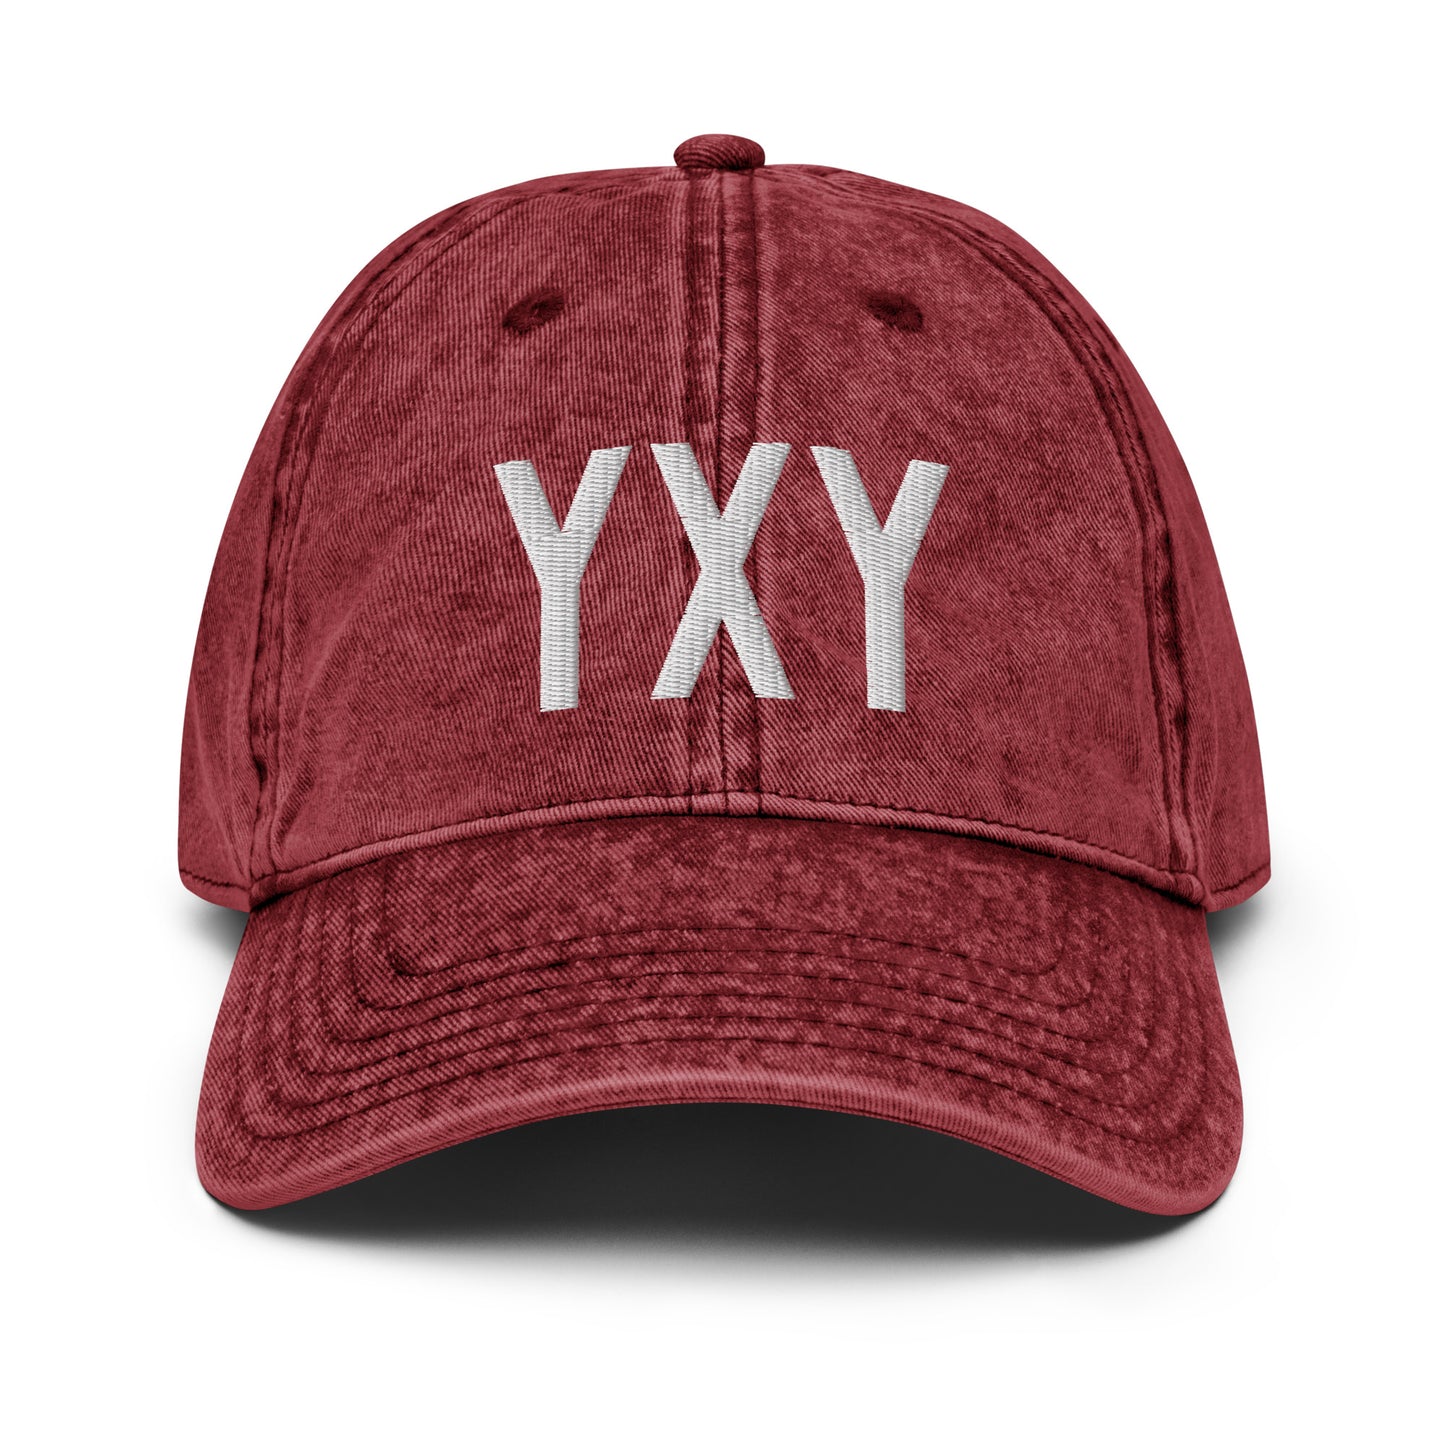 Airport Code Twill Cap - White • YXY Whitehorse • YHM Designs - Image 19